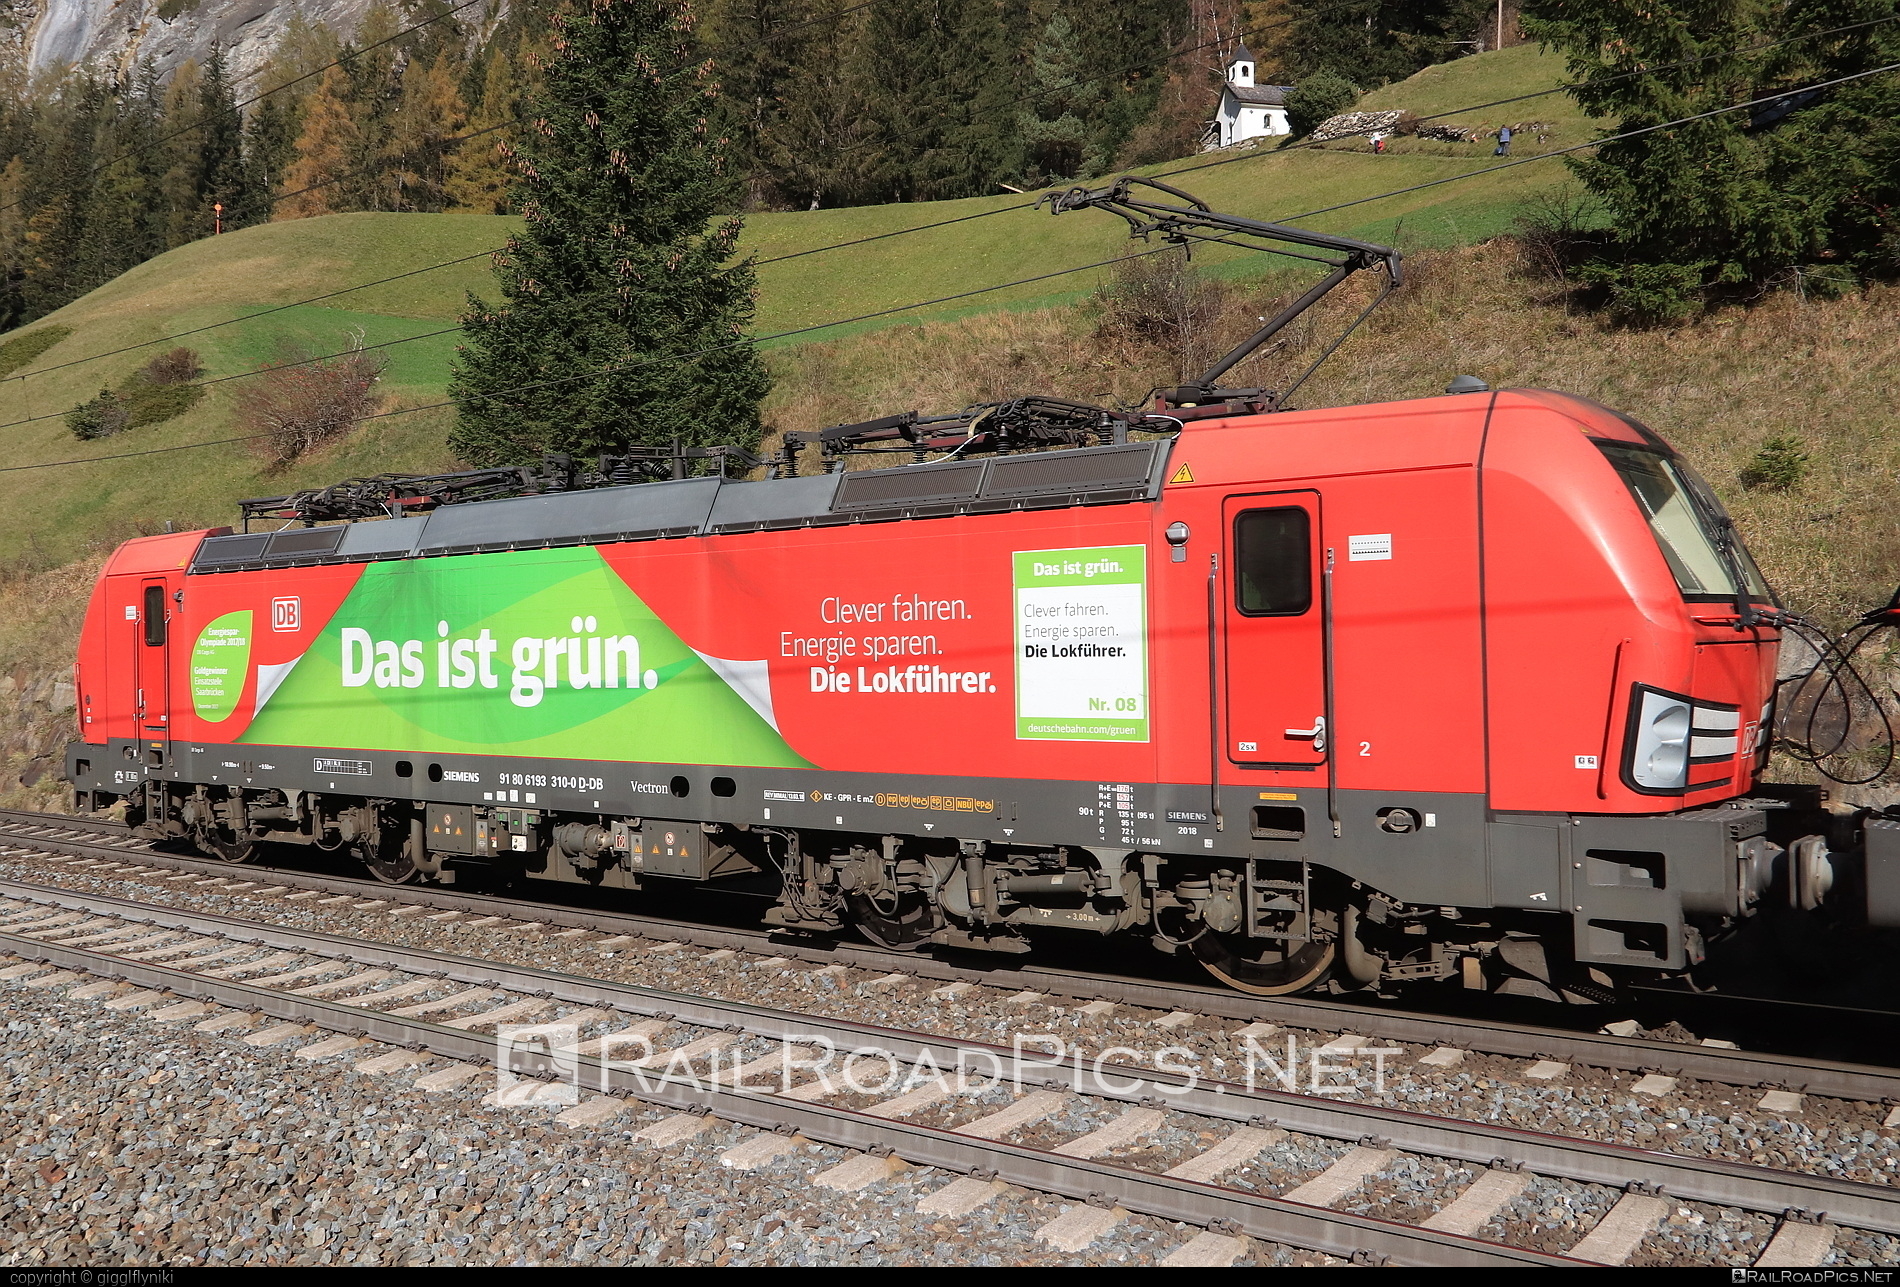 Siemens Vectron MS - 193 310 operated by DB Cargo AG #db #dbcargo #dbcargoag #deutschebahn #siemens #siemensVectron #siemensVectronMS #vectron #vectronMS